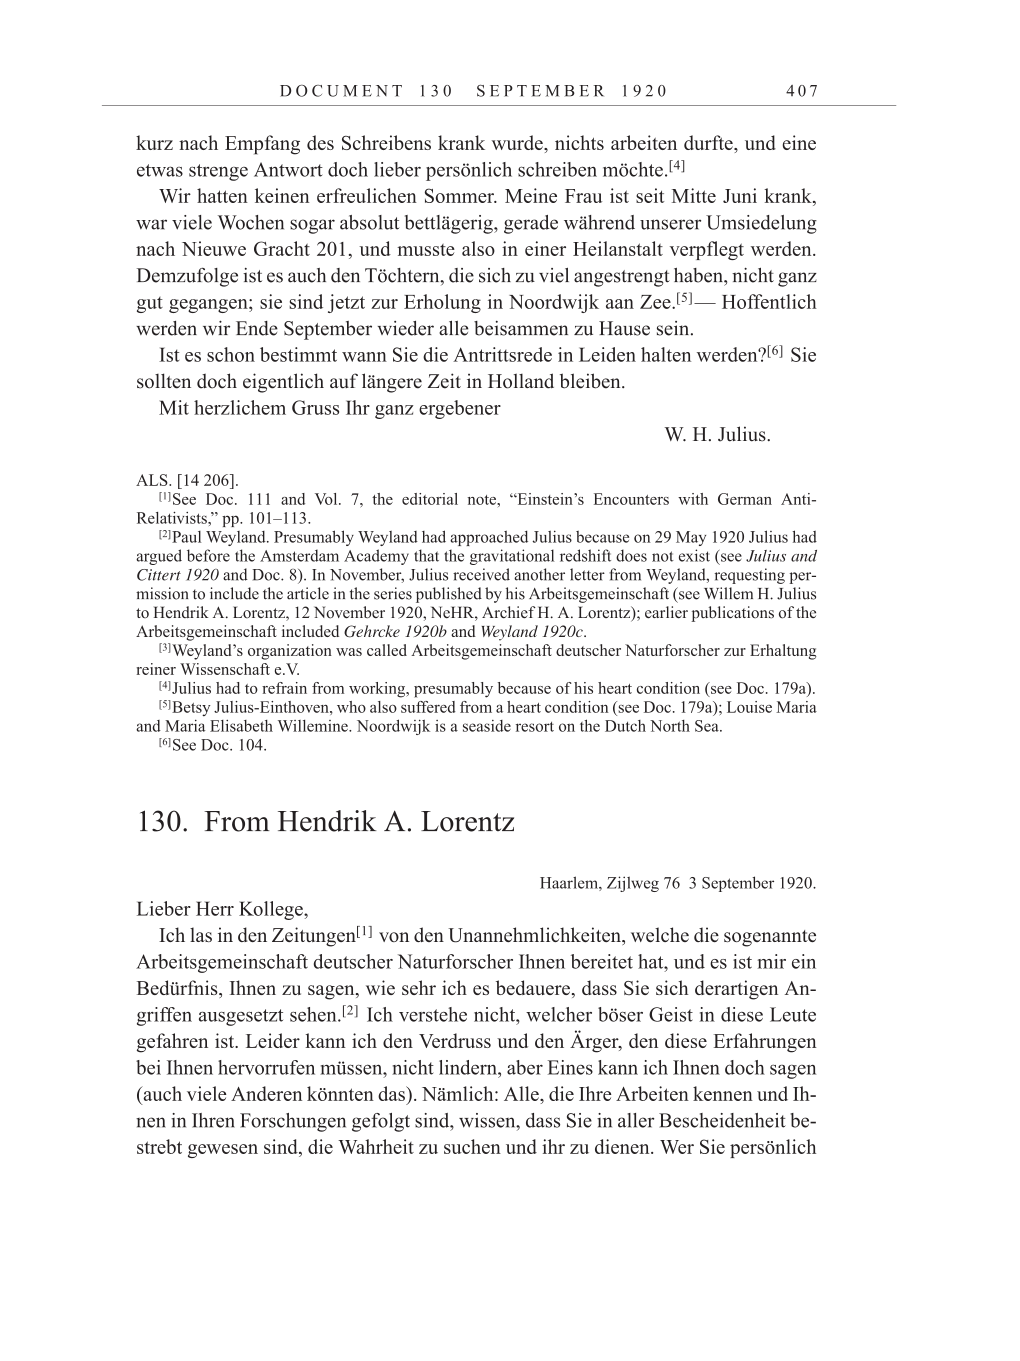 Volume 10: The Berlin Years: Correspondence May-December 1920 / Supplementary Correspondence 1909-1920 page 407